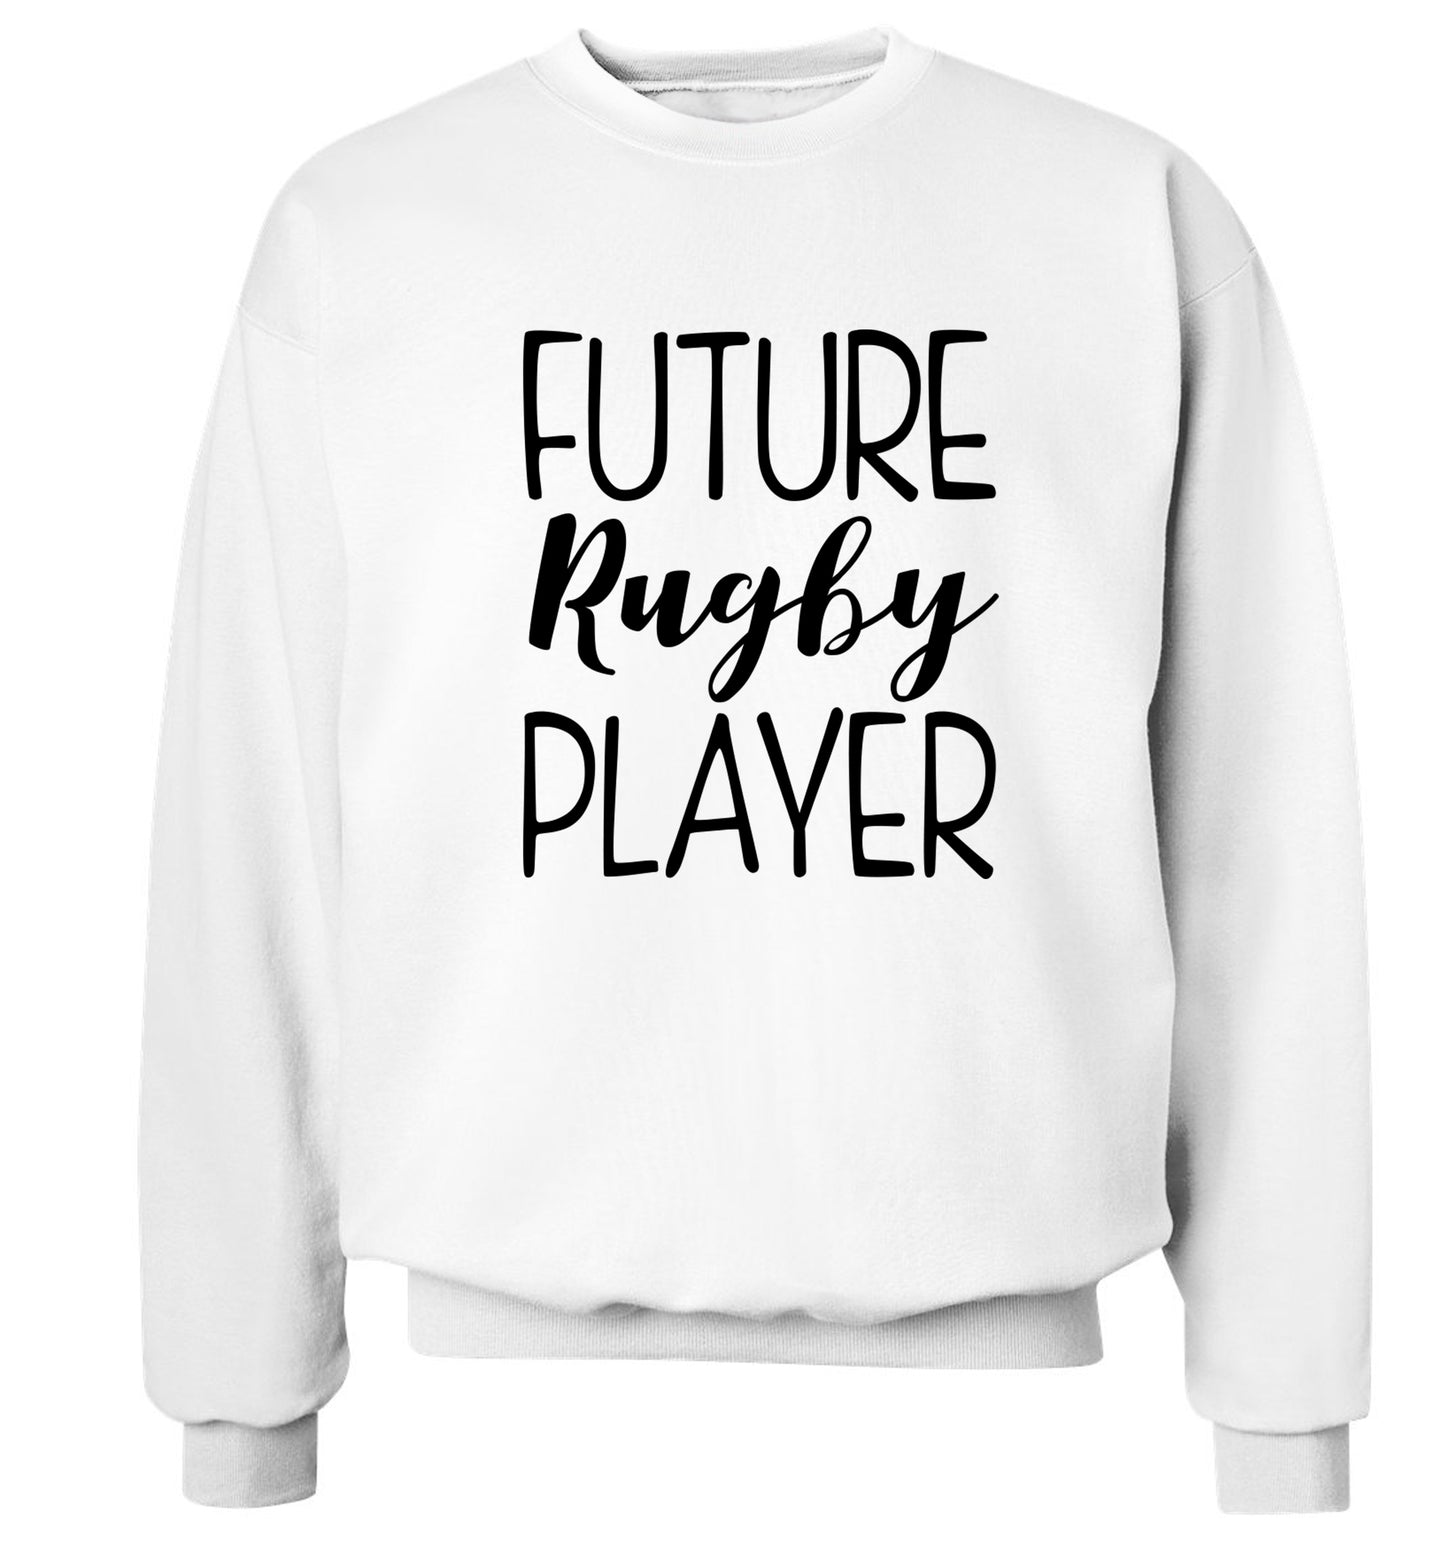 Future rugby player Adult's unisex white Sweater 2XL